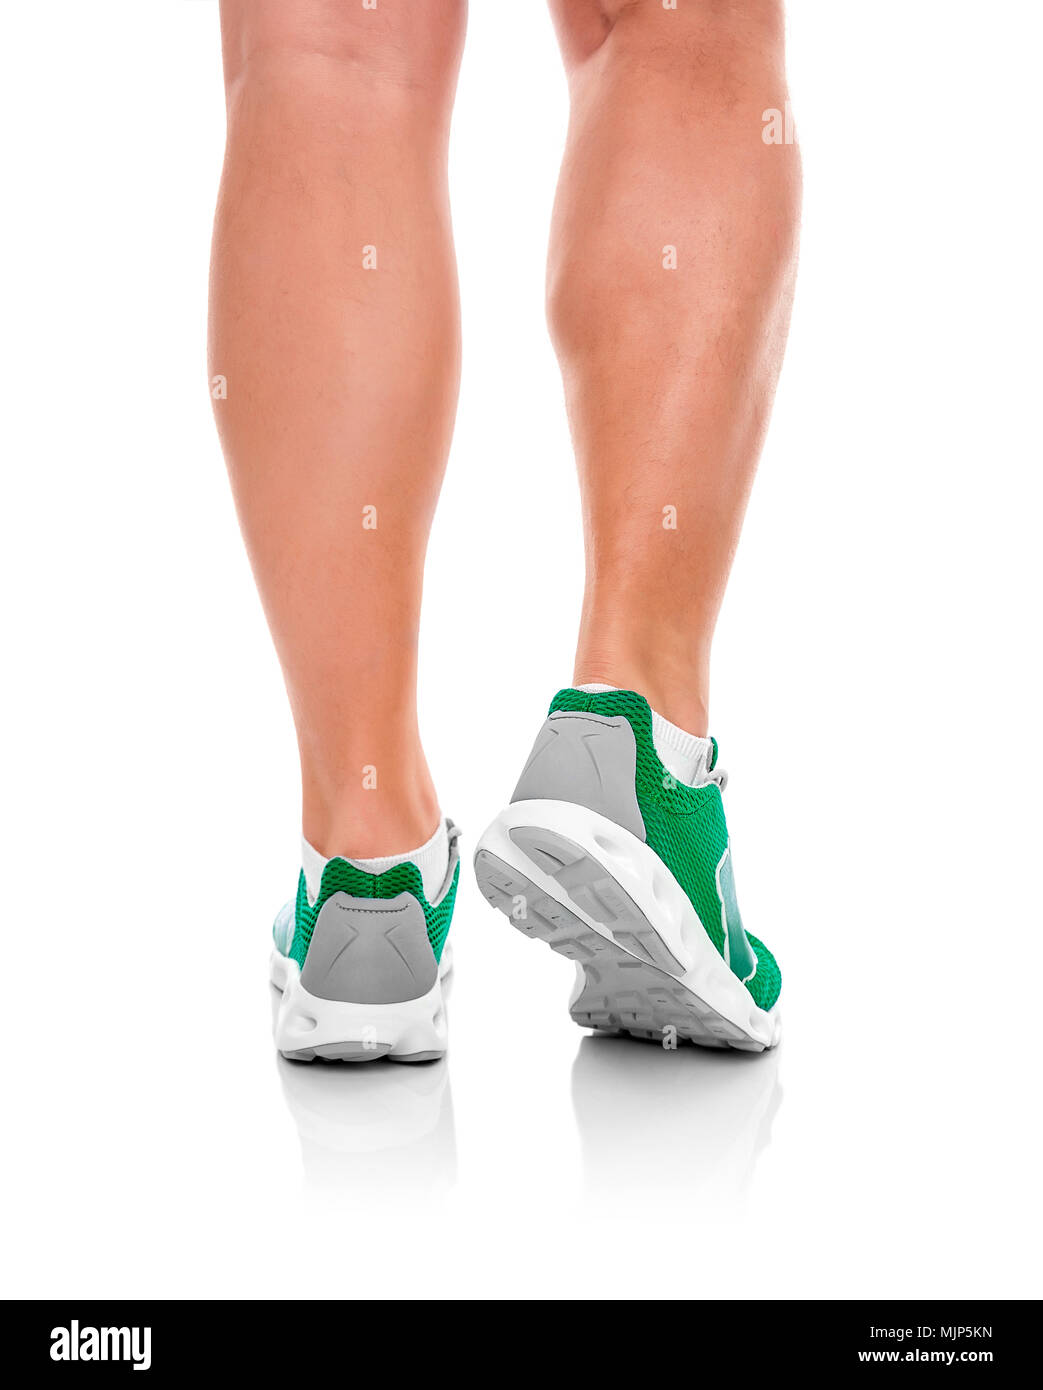 Male legs in sneakers over white. Stock Photo